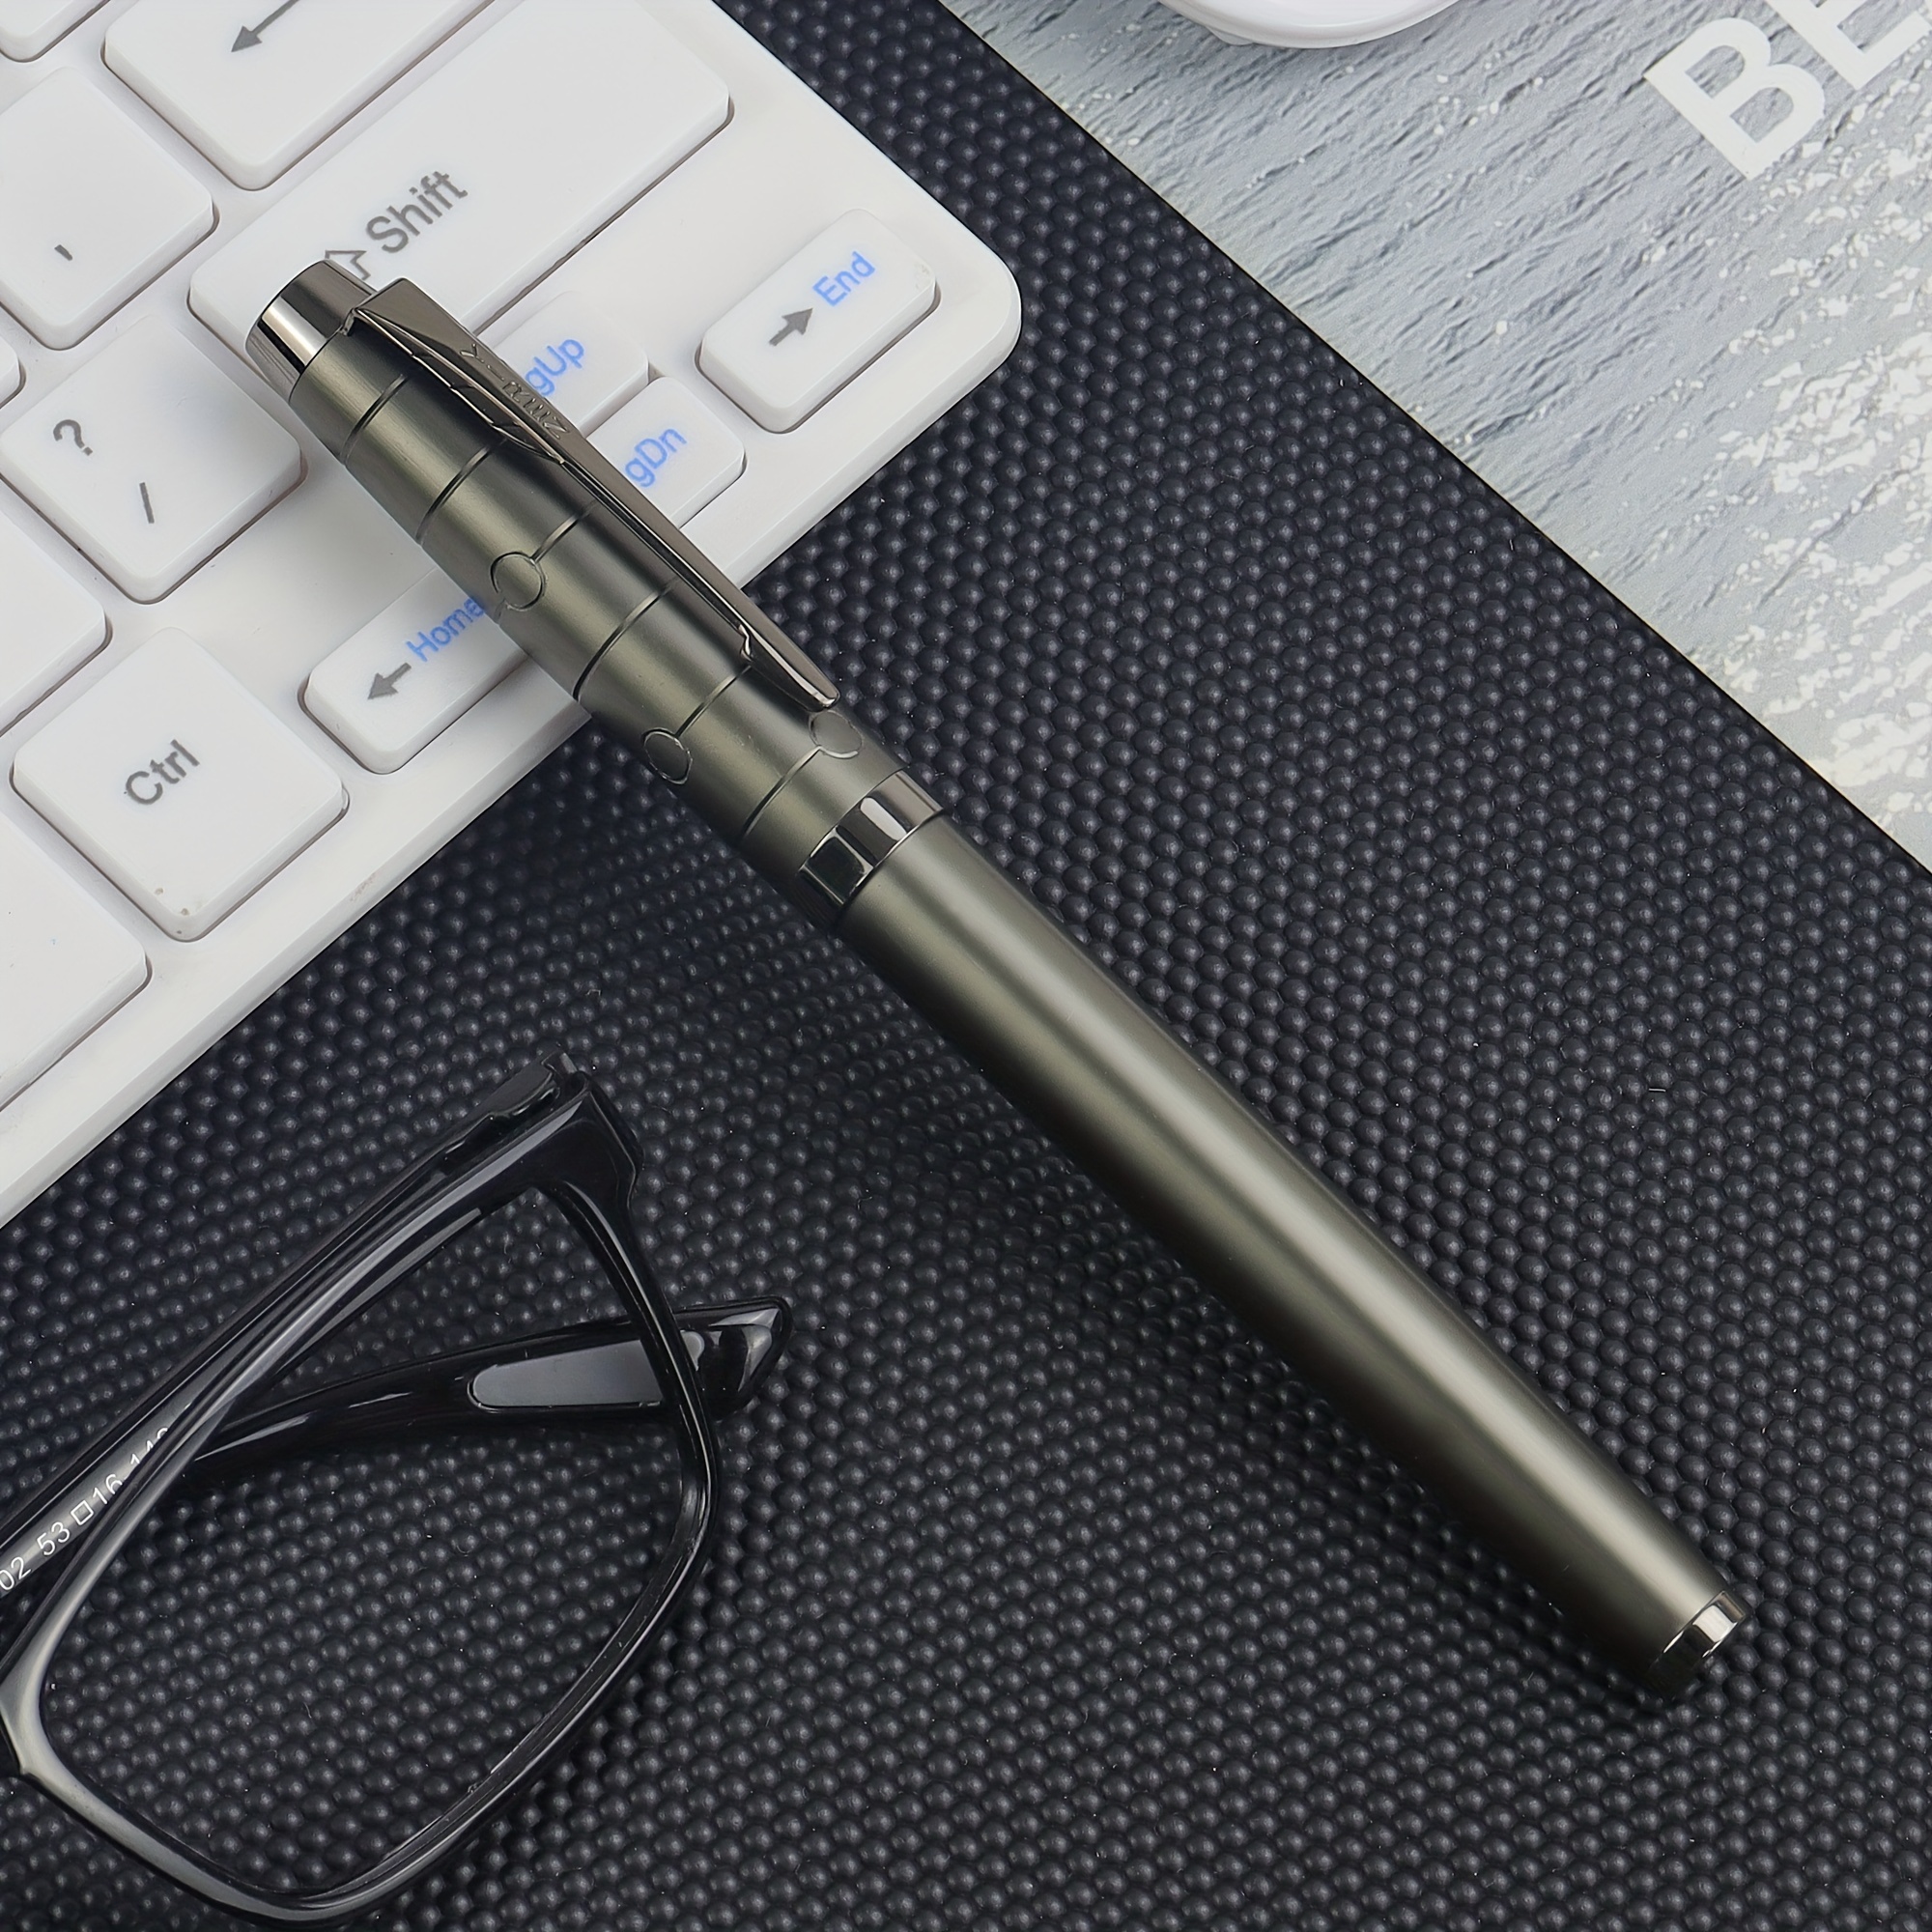 

High-quality Metal Fountain Pen - Ergonomic Design, Medium Point With Click-off Cap Closure, Perfect For Business Professionals, Smooth Writing For Journaling And Signing, Ideal Gift